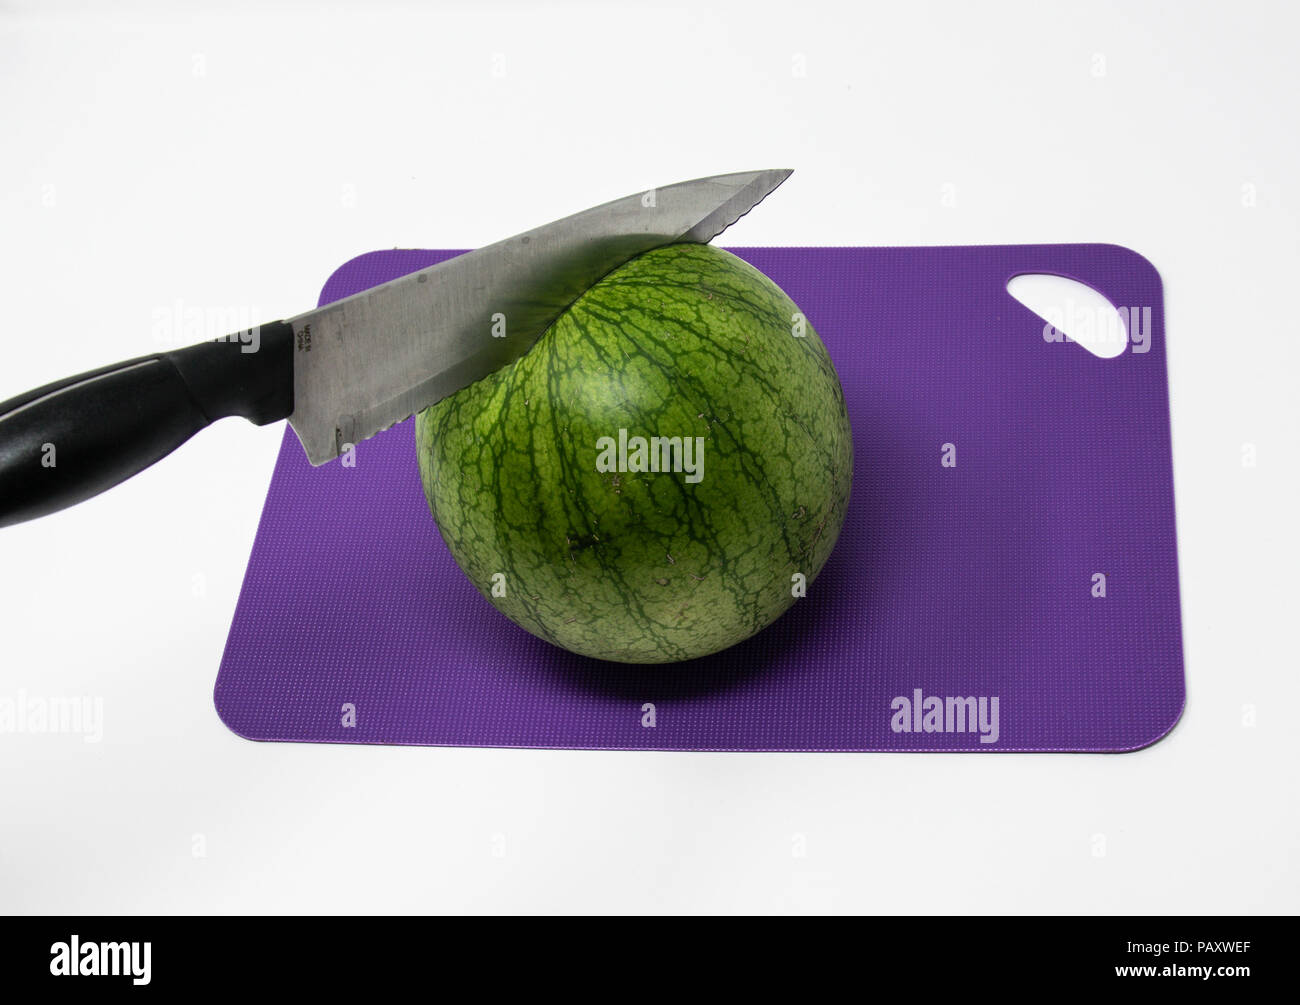 Big knife Cut Out Stock Images & Pictures - Alamy